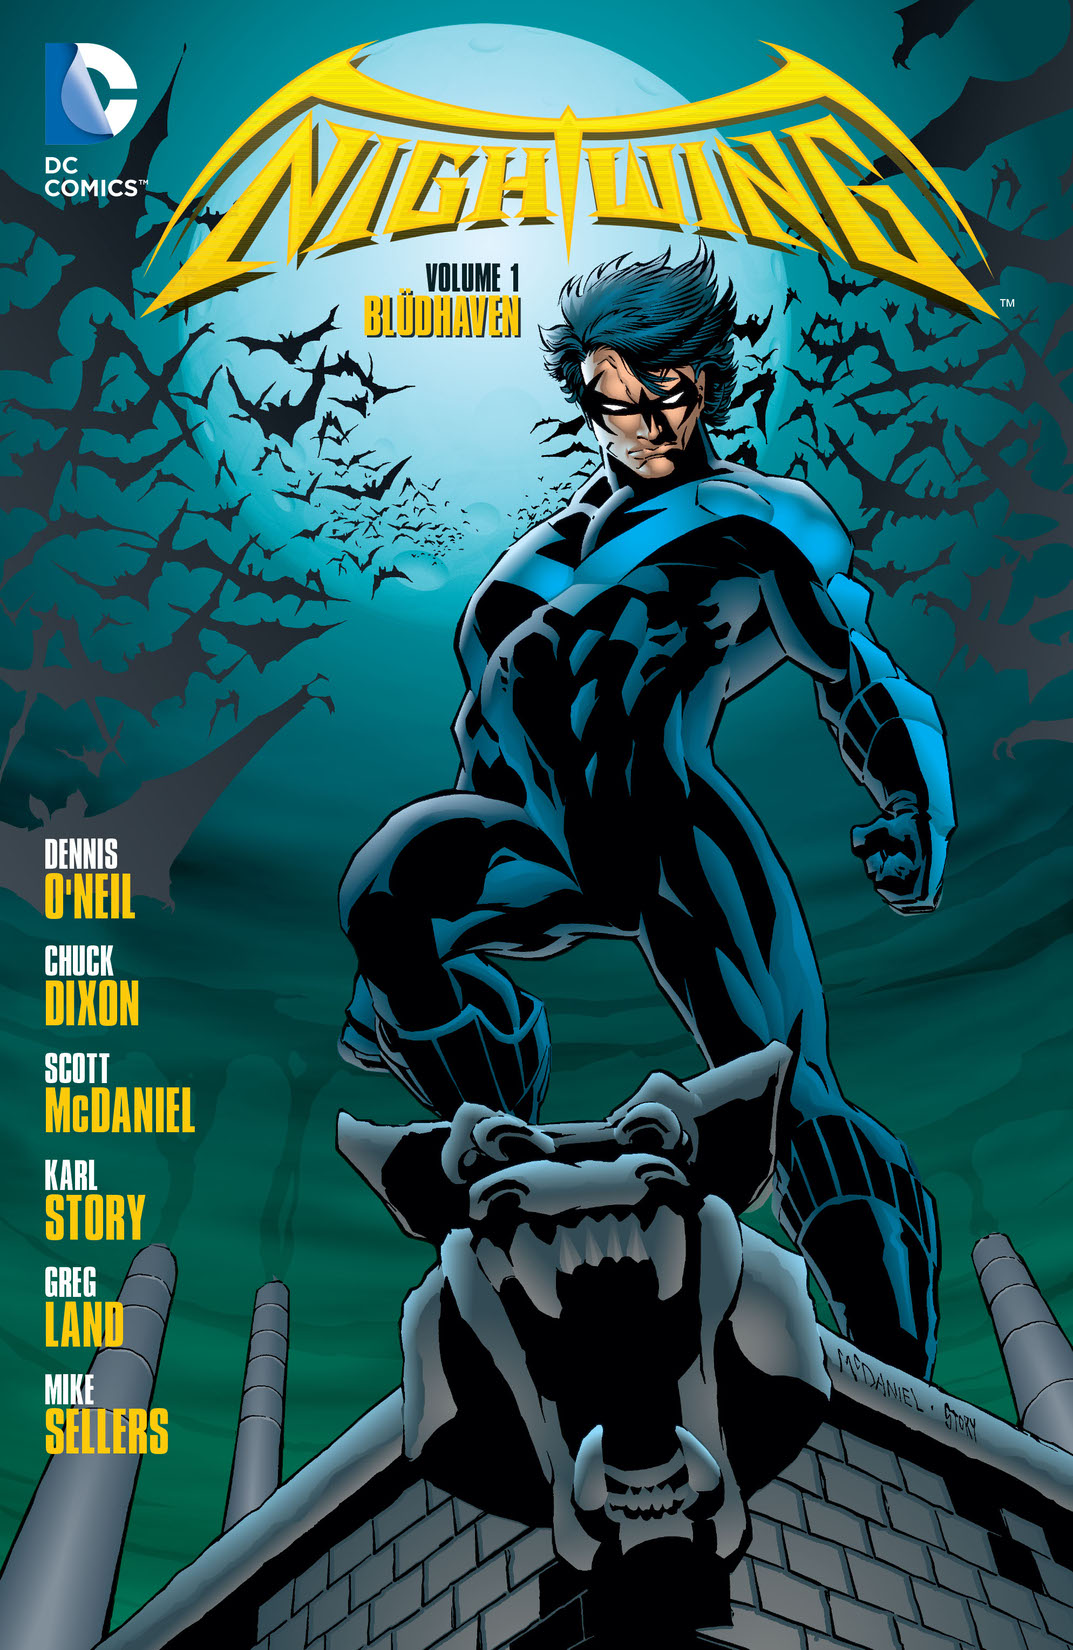 Nightwing Vol. 1: Bludhaven preview images